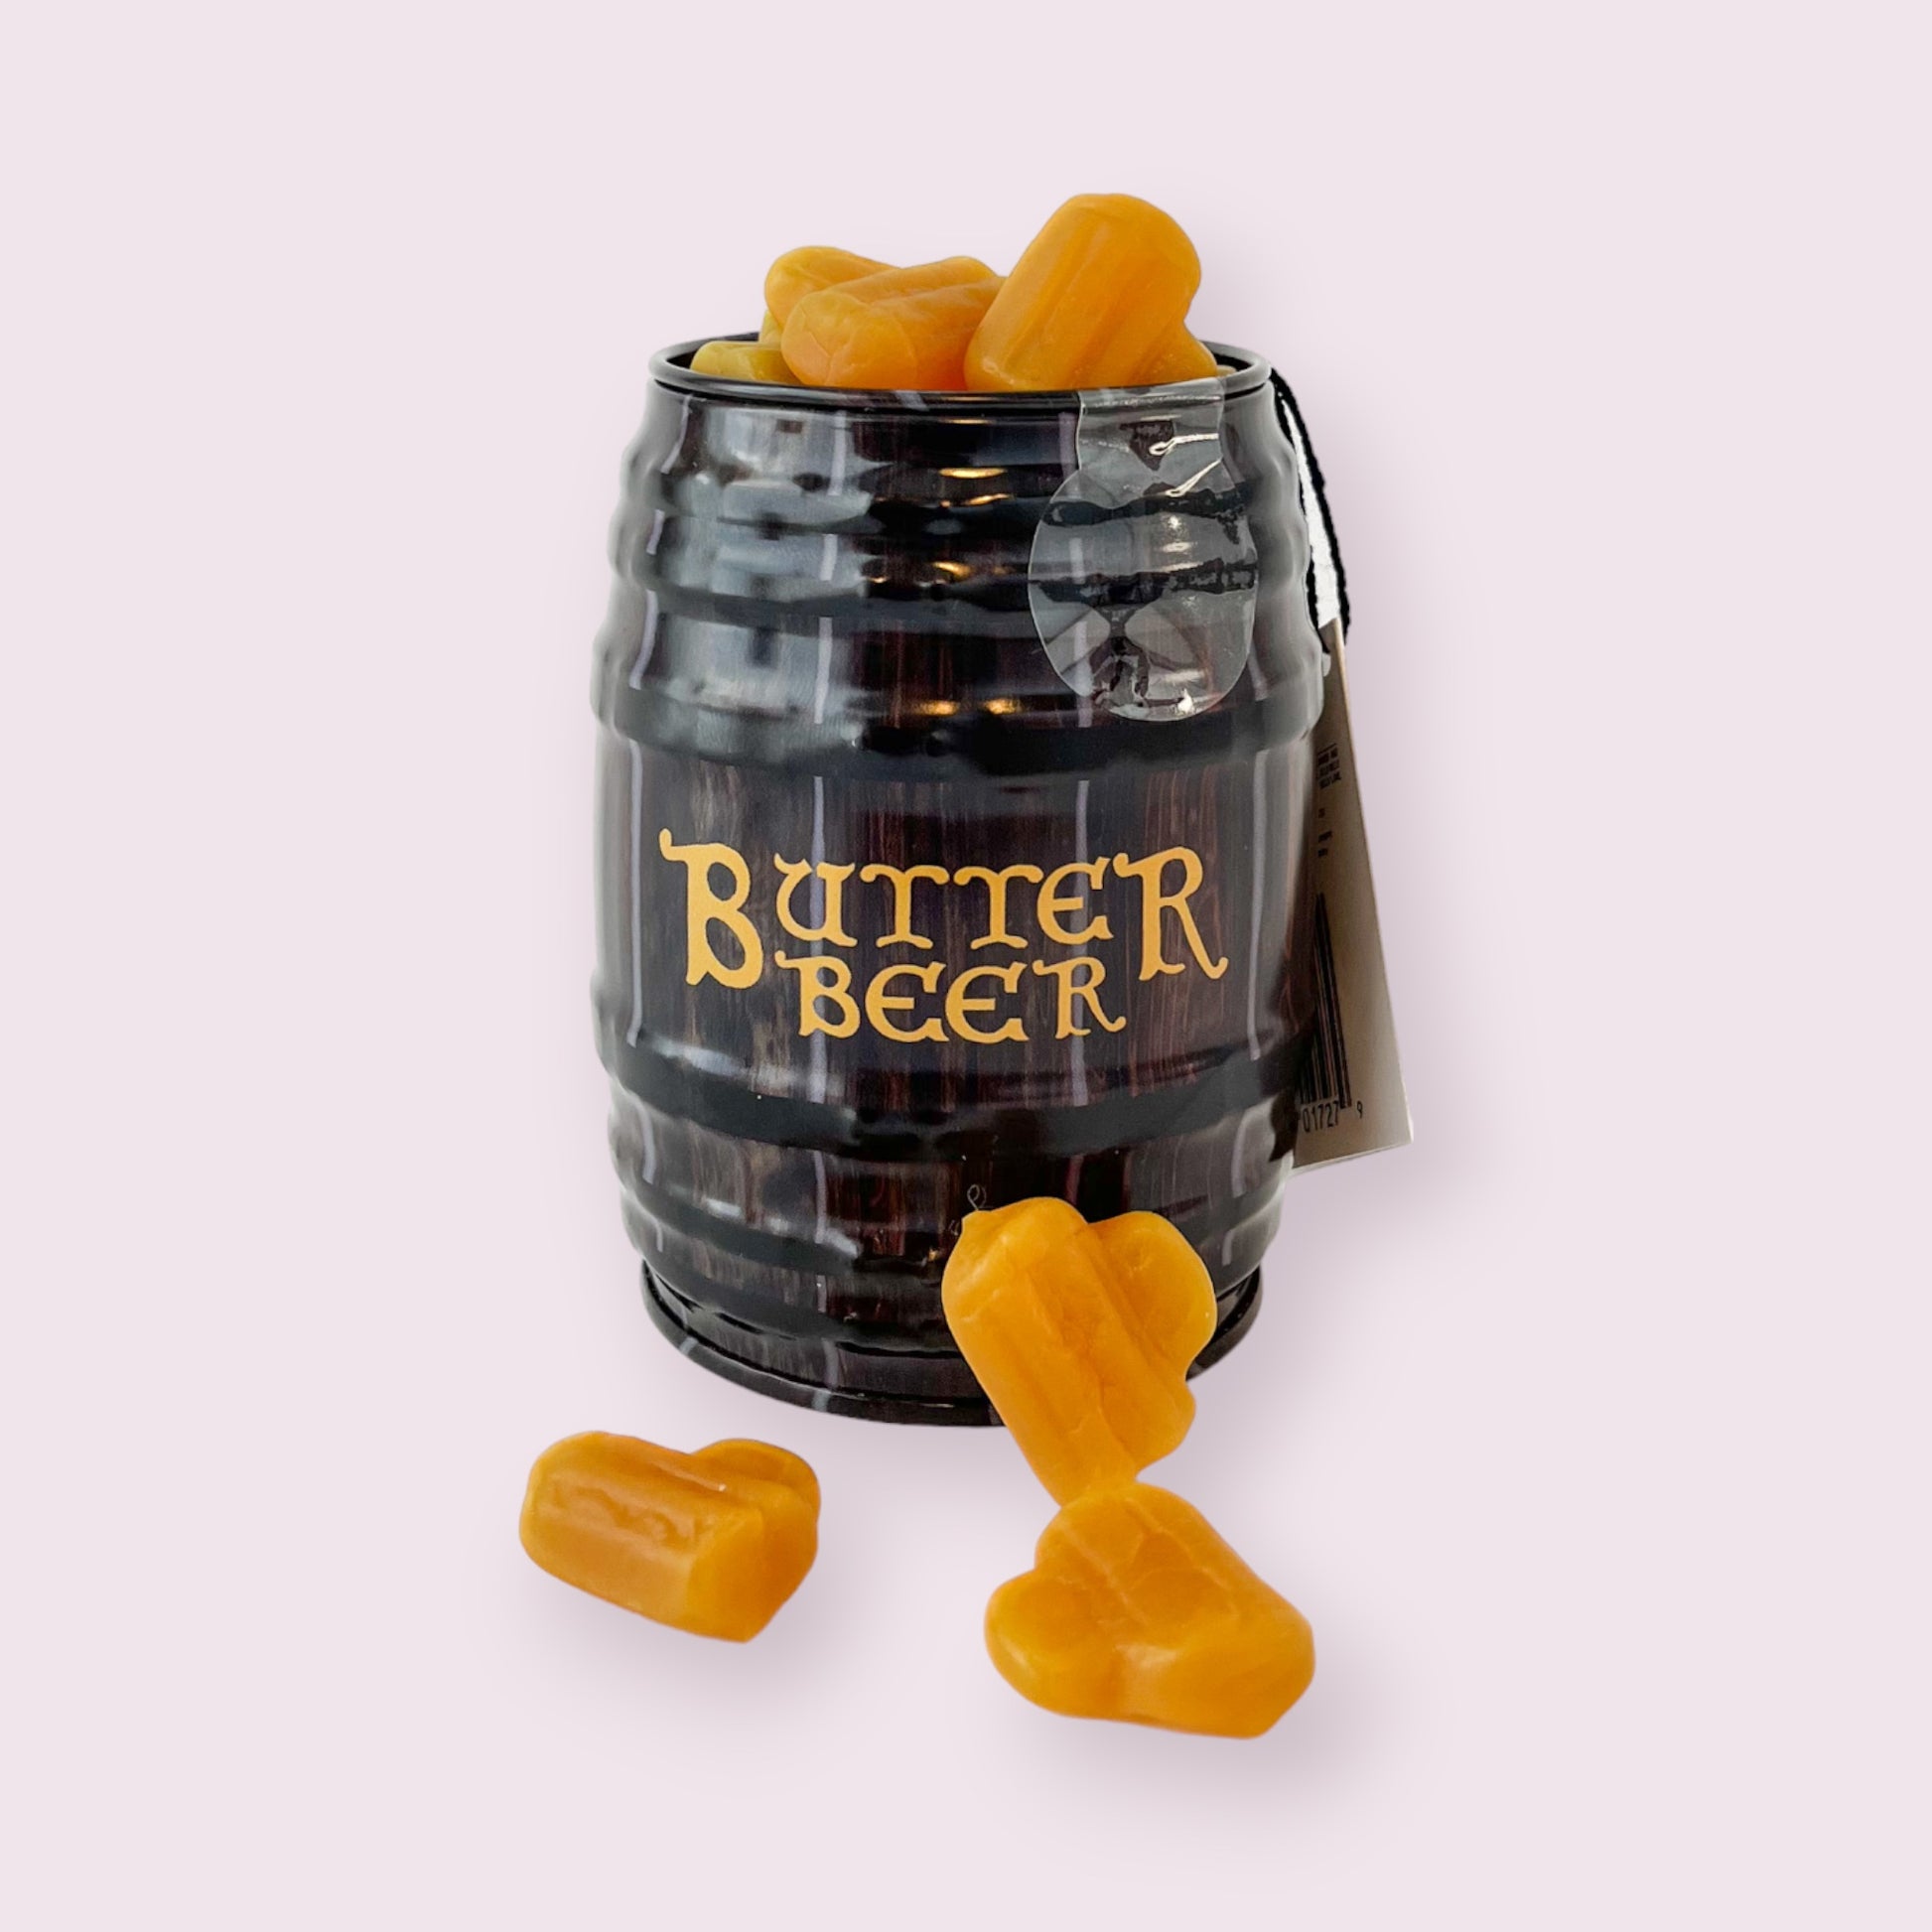 Harry Potter Butterbeer Chewy Candy Barrels  Pixie Candy Shoppe   